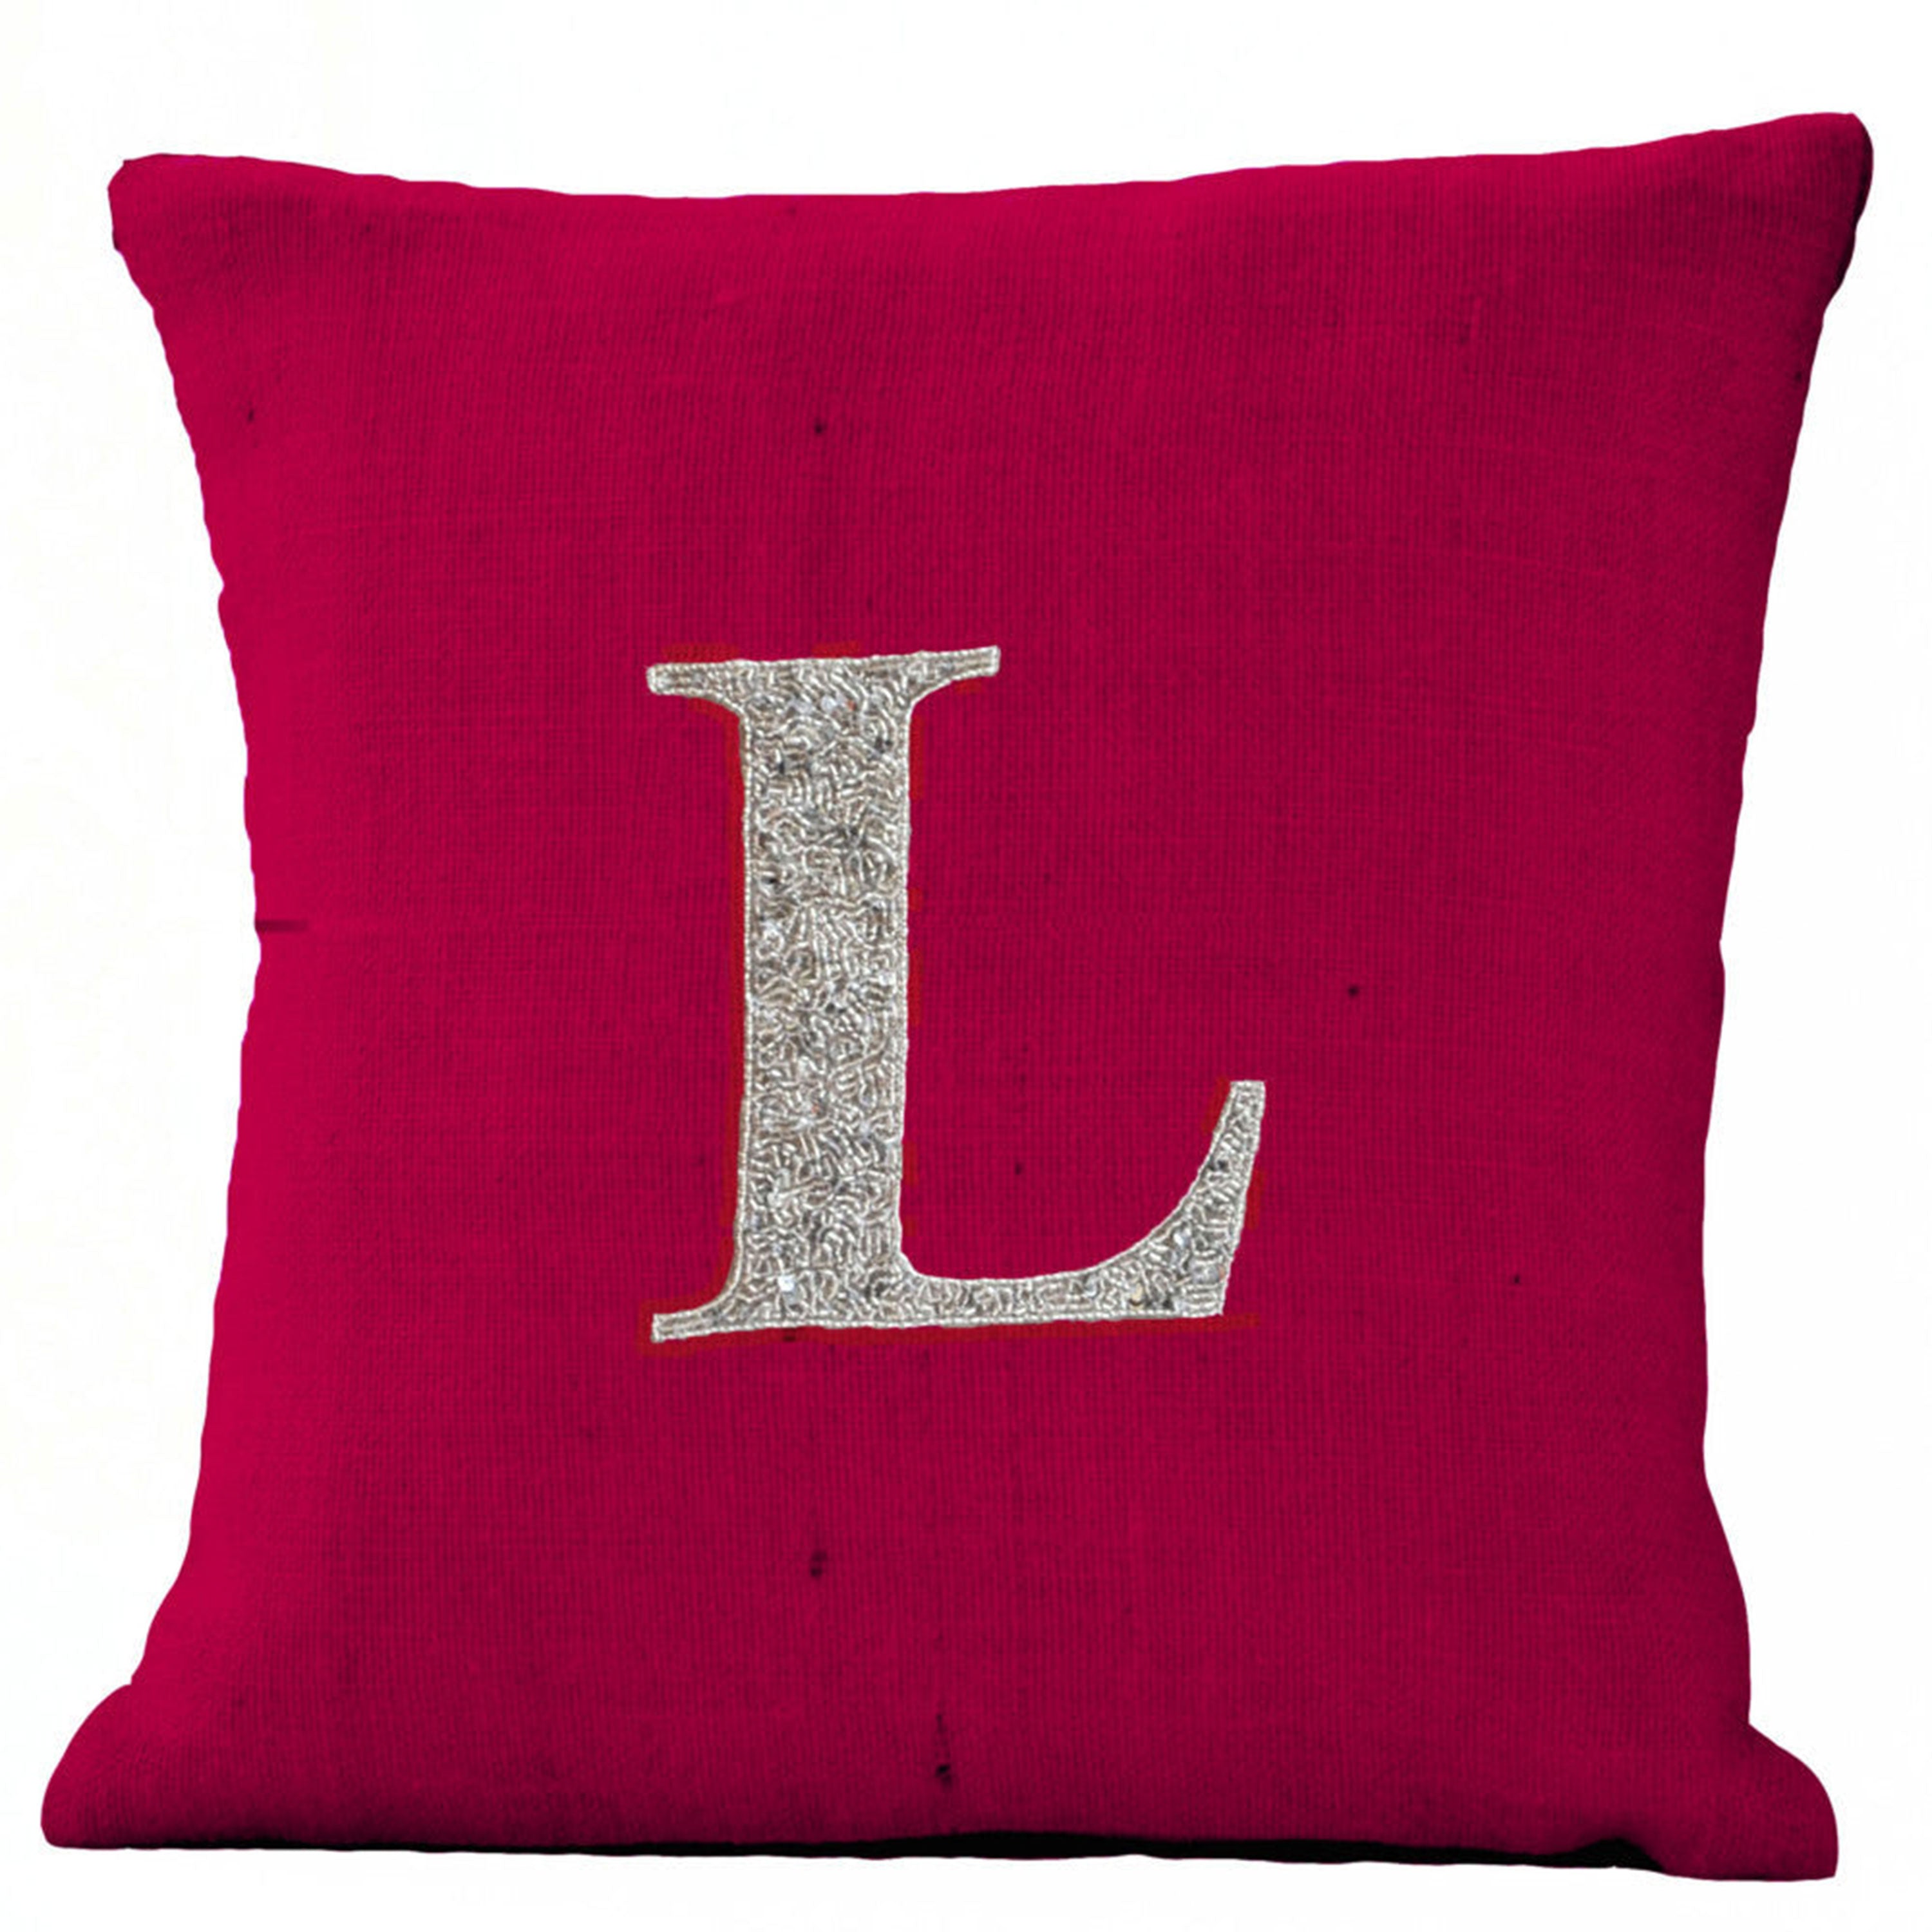 Fuchsia Pillow Case with Silver Bling Monogram Initial Cushion